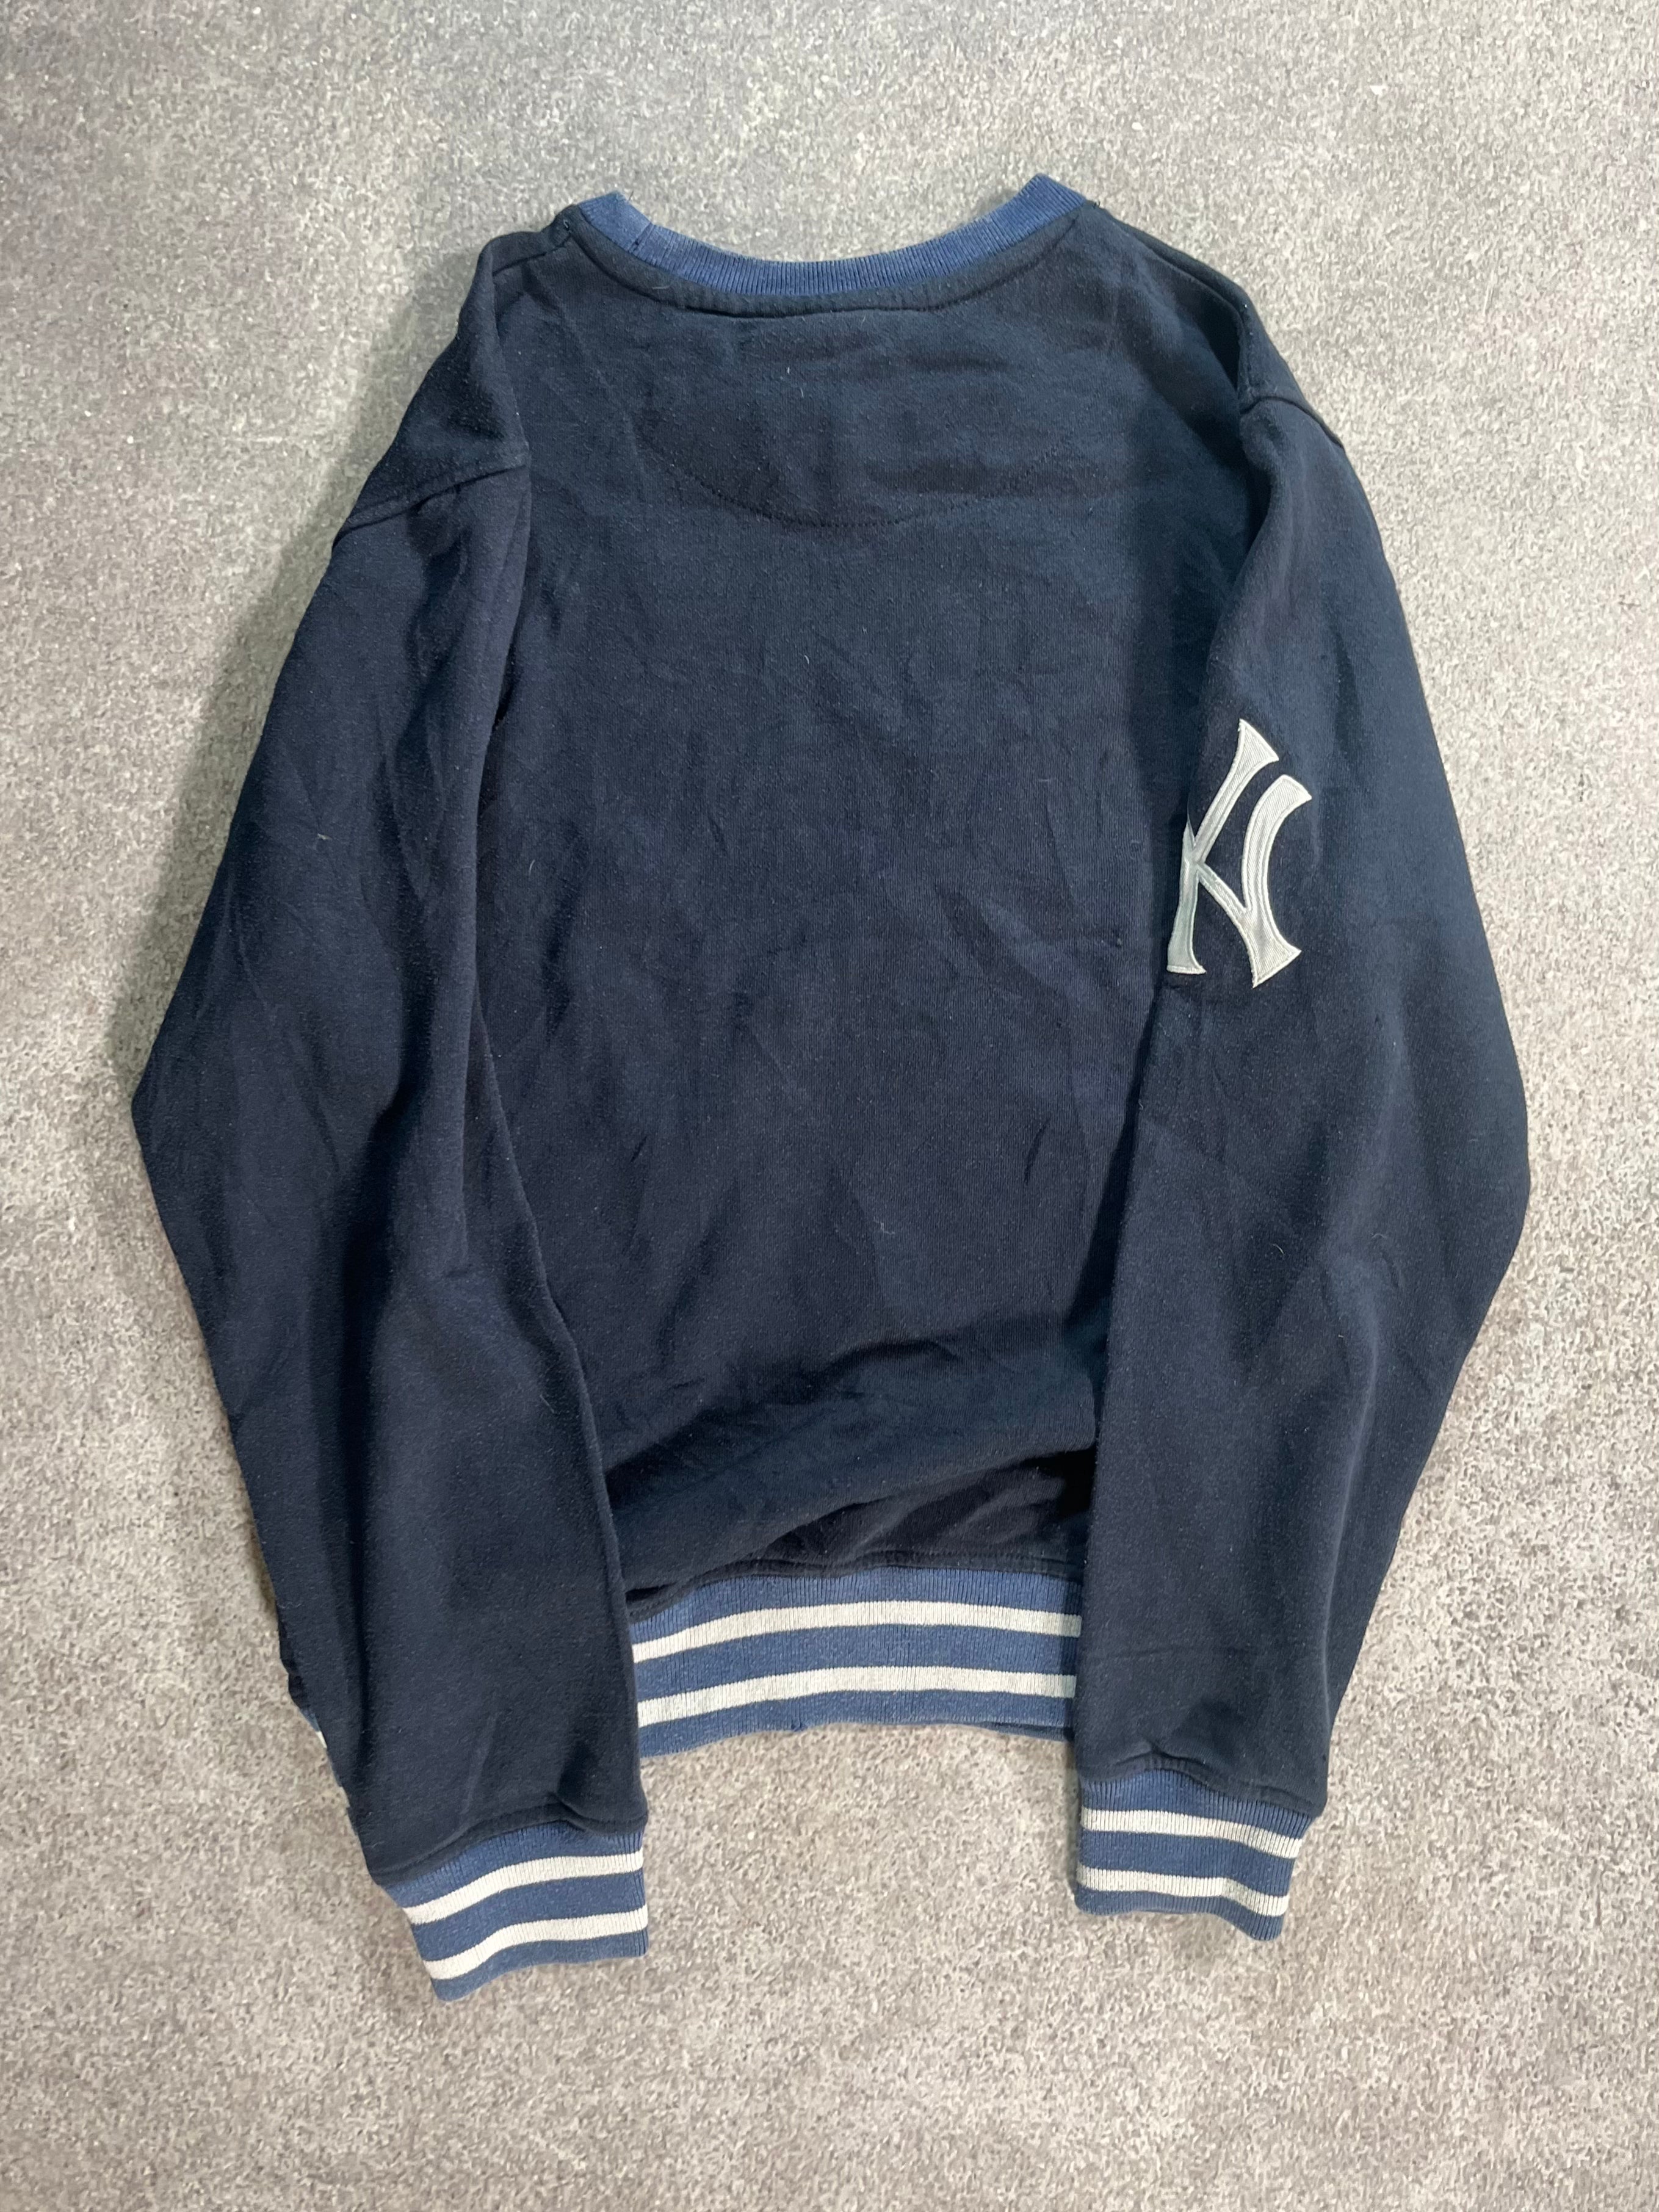 Vintage NY Yankees Sweater Blue  // Small - RHAGHOUSE VINTAGE